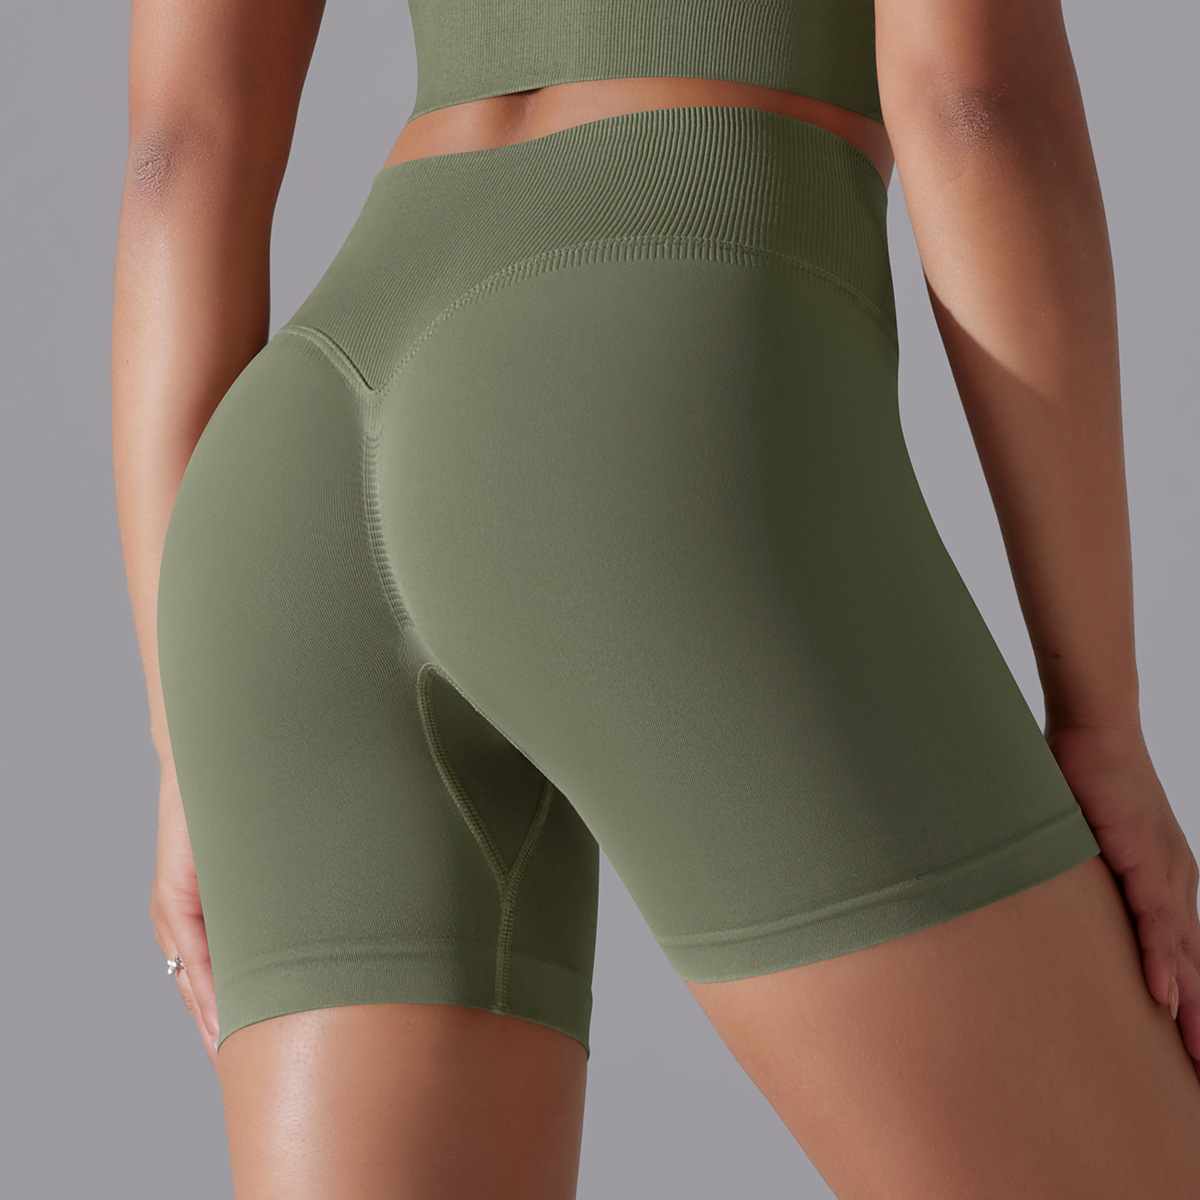 sports shorts manufacturers